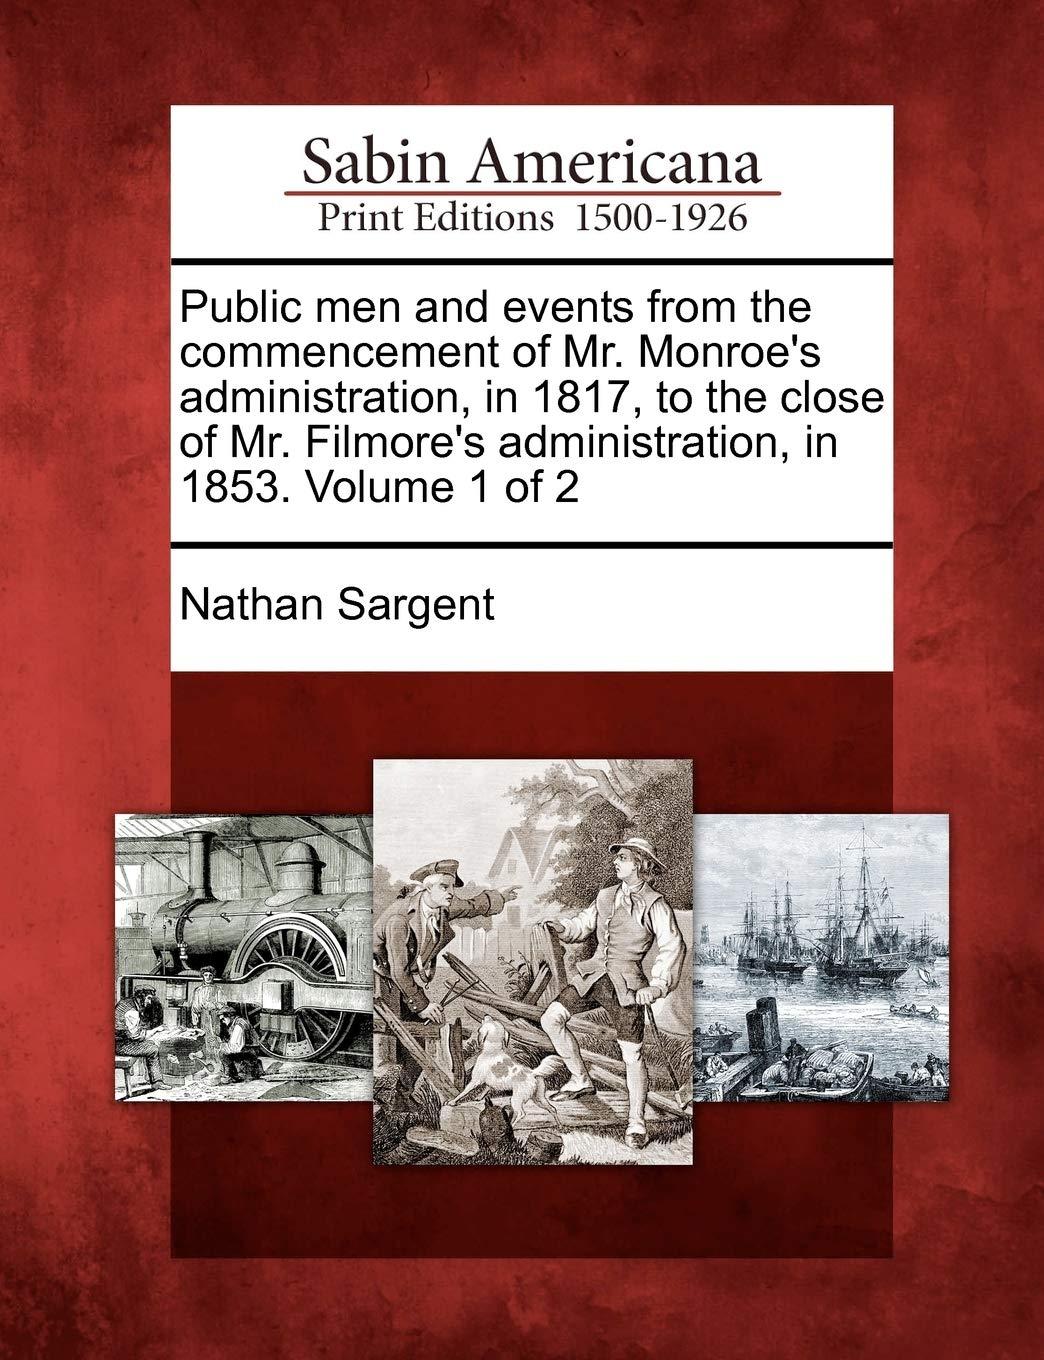 public men and events from the commencement of mr monroes administration in 1817 to the close of mr filmores